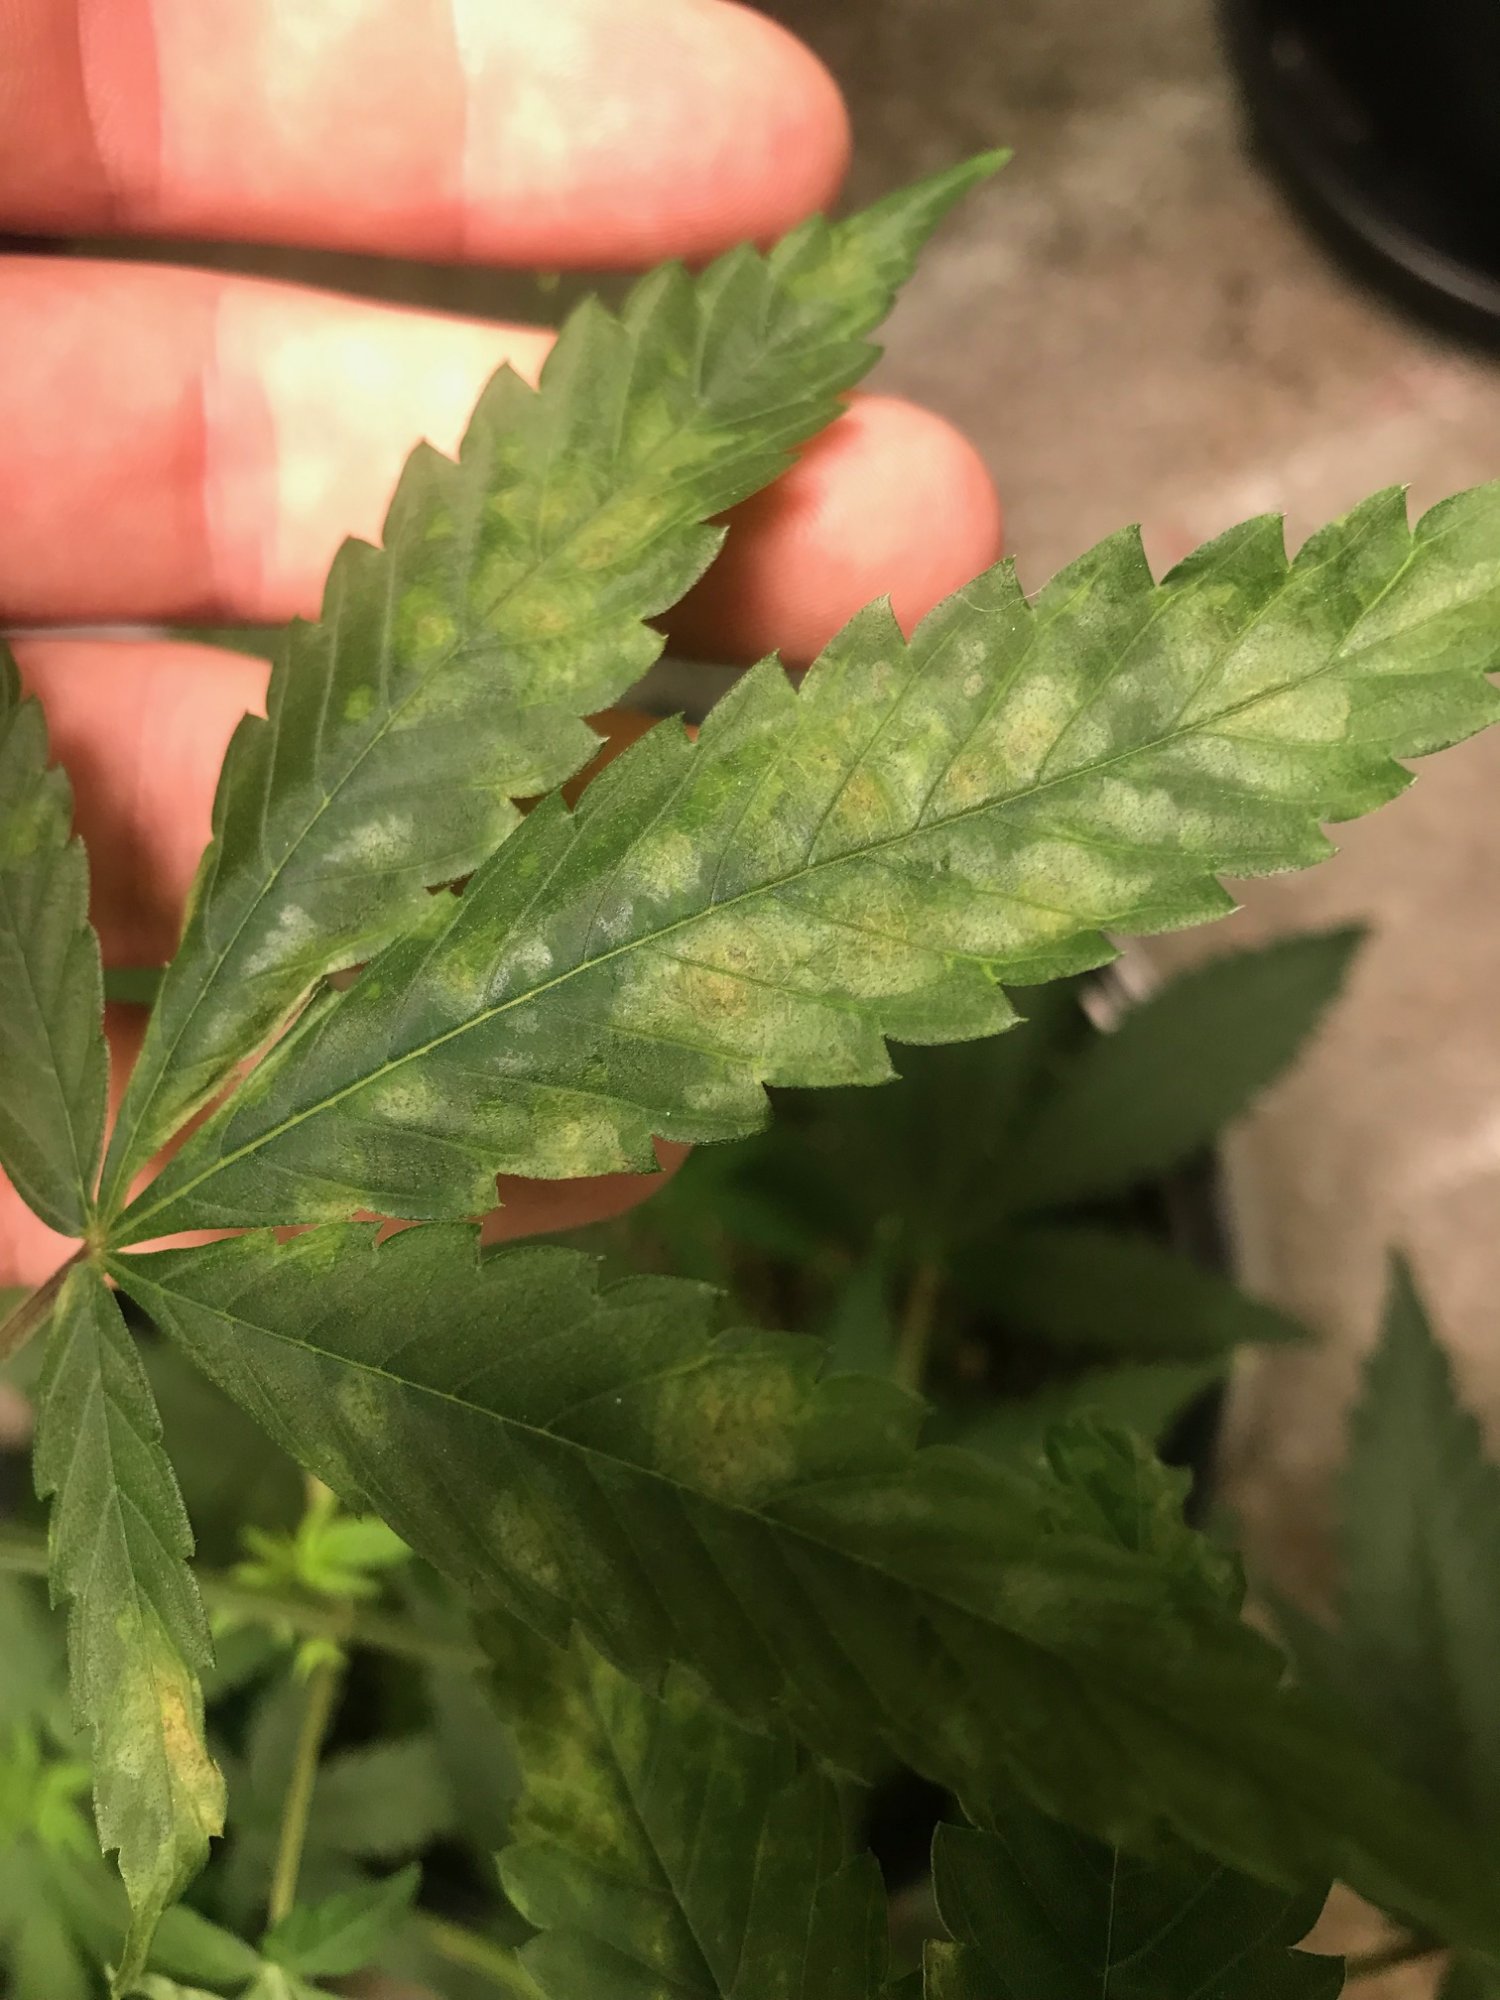 Orangey brownish spots on some leaves 4